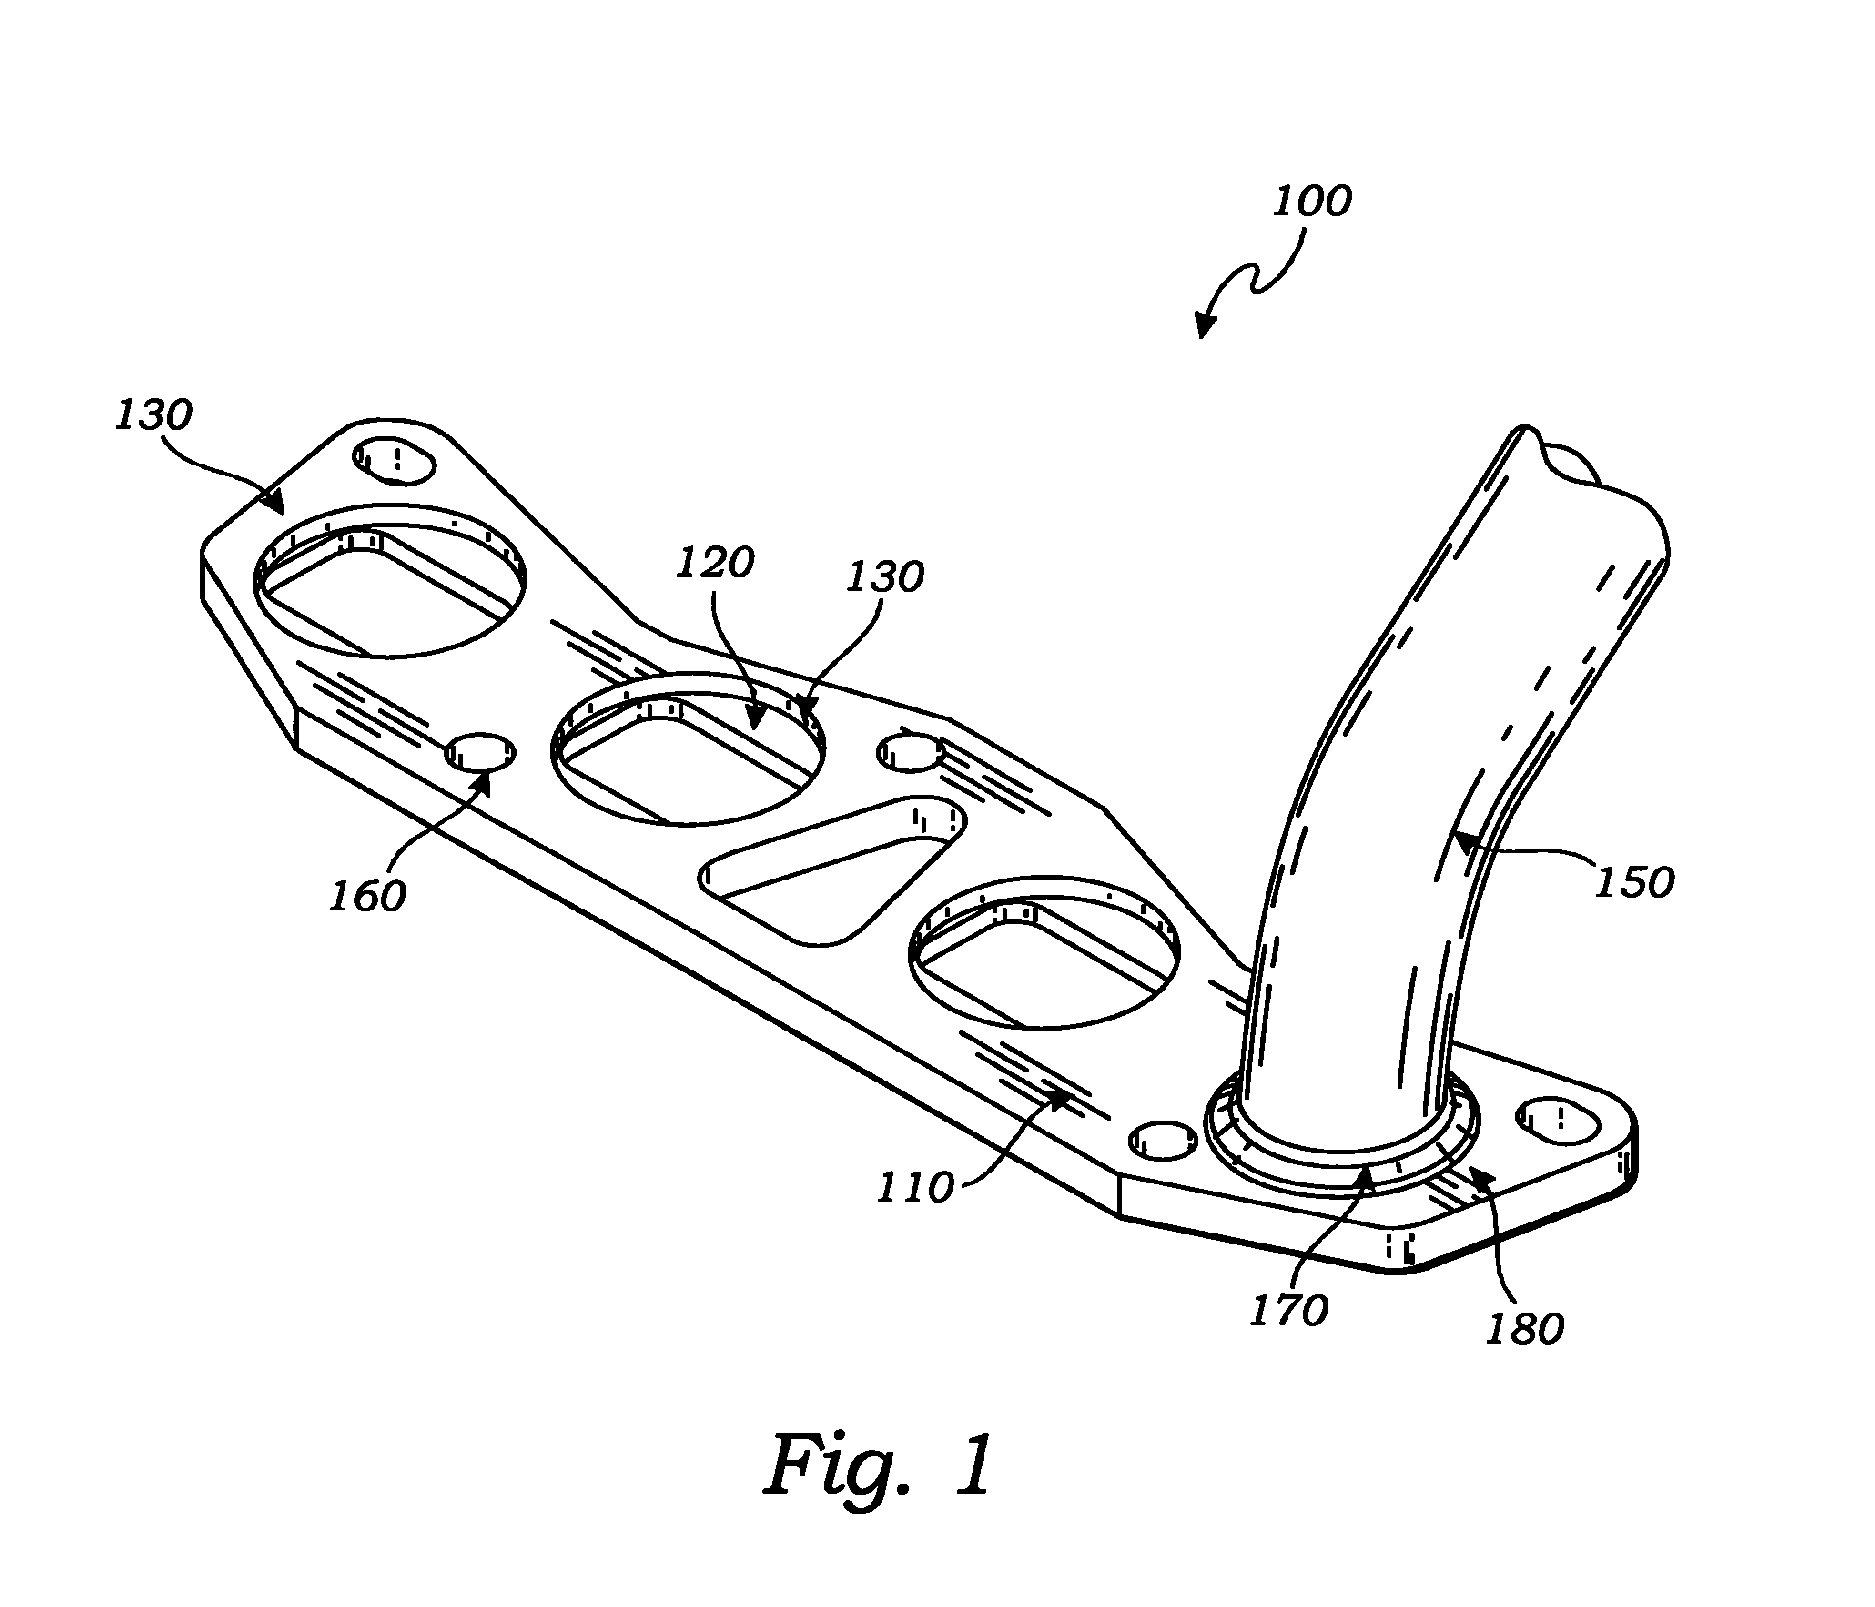 Method and apparatus for mating irregular or non-circular exhaust ports with tubing of a circular cross section in exhaust flange assemblies